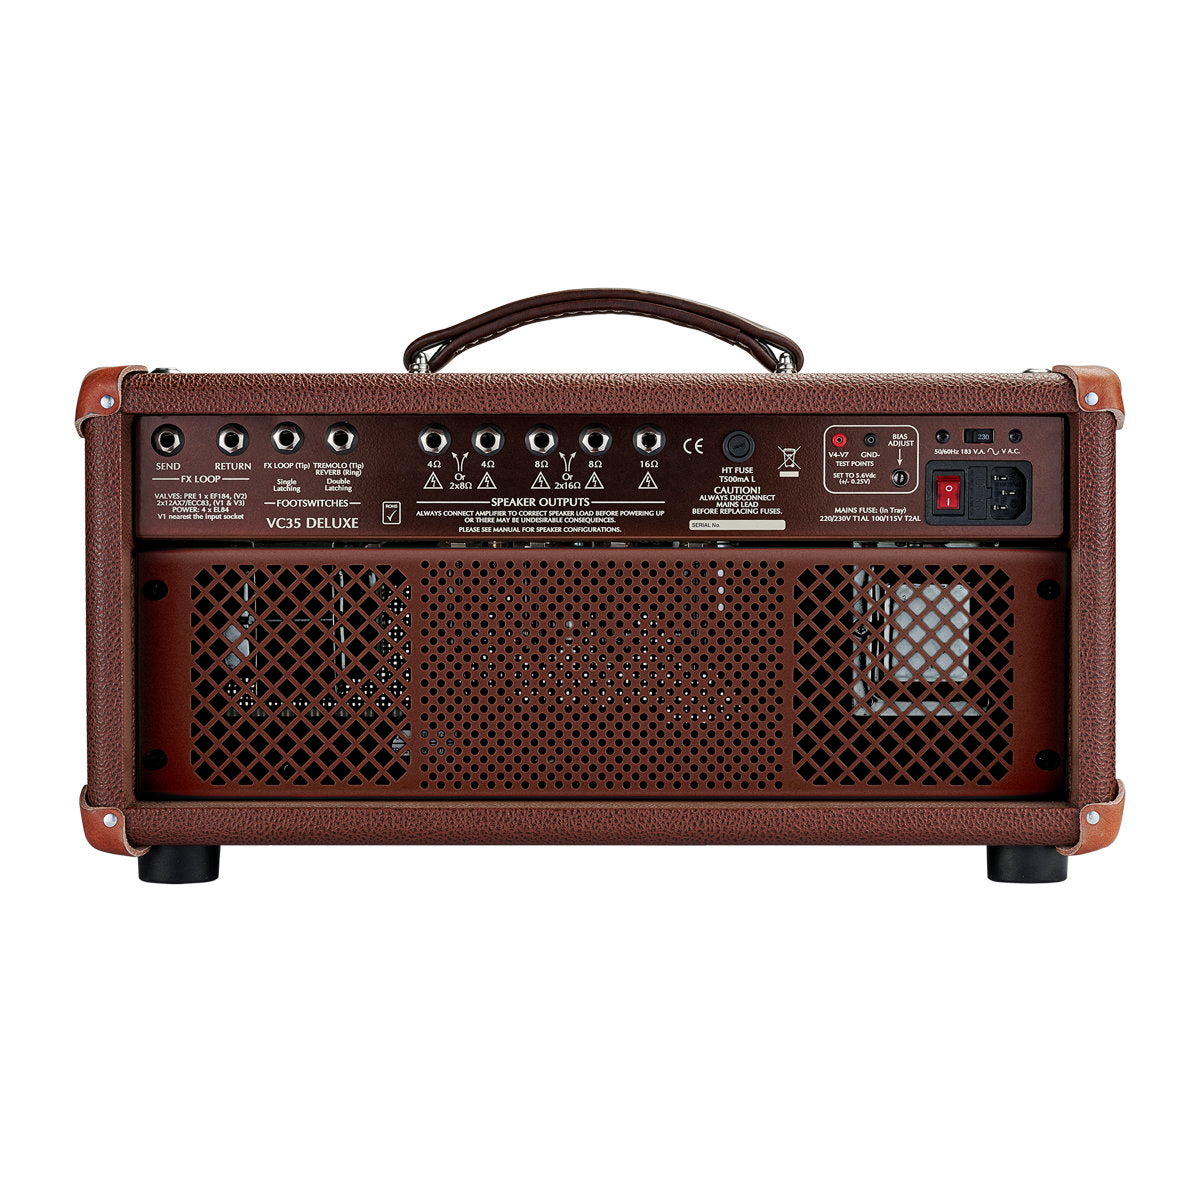 Victory VC35 The Copper Deluxe Guitar Amplifer Head (35 Watts)